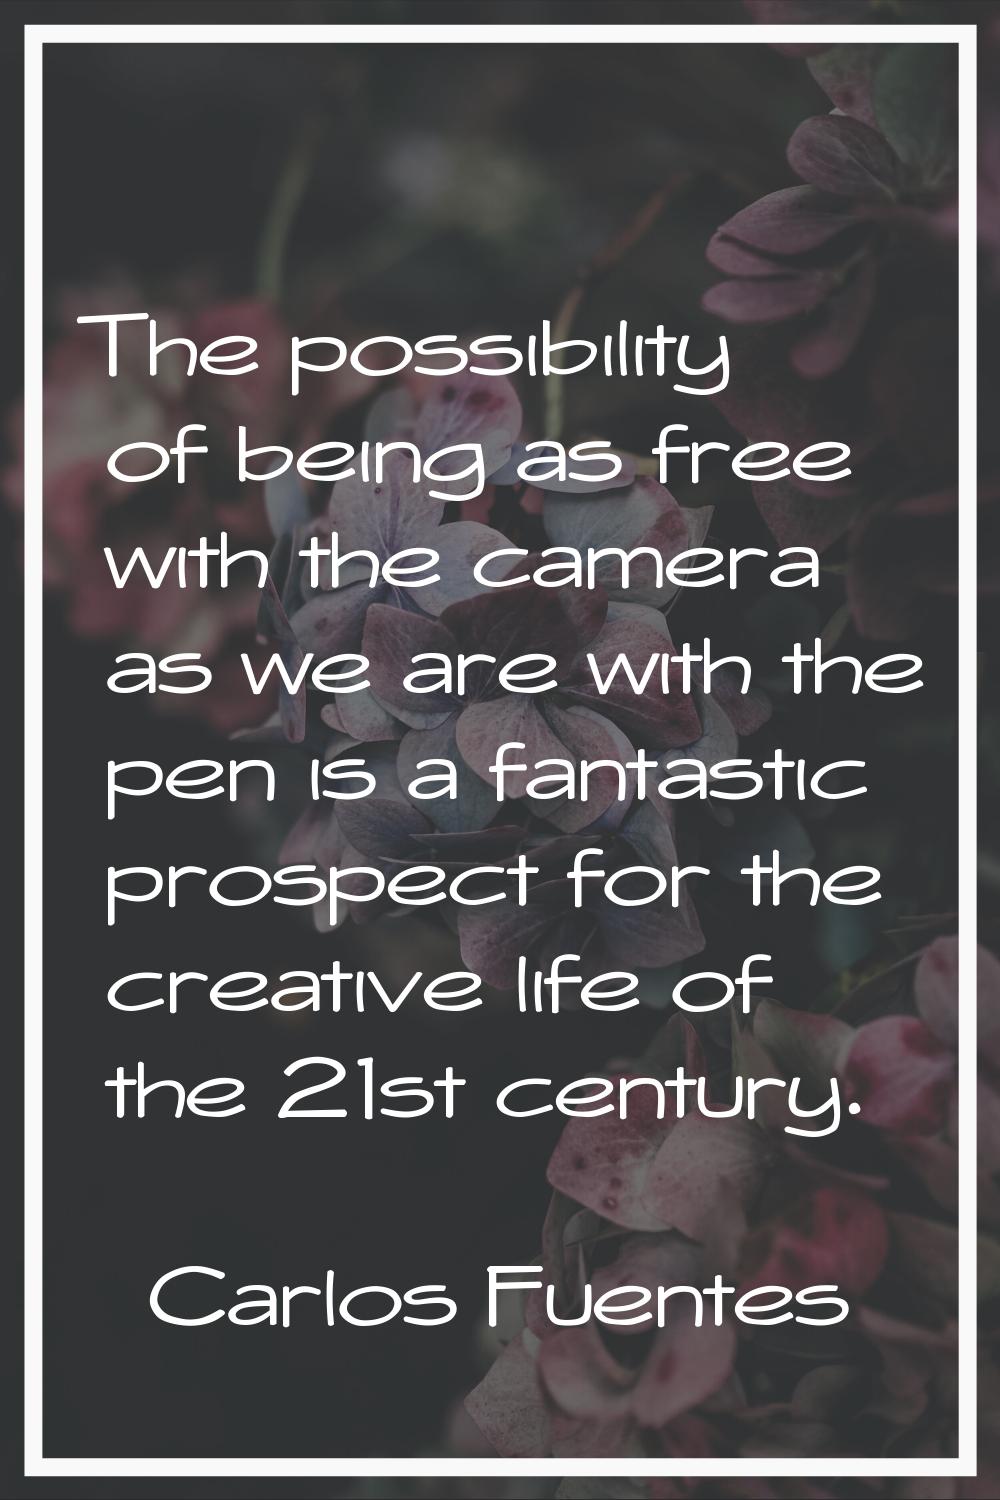 The possibility of being as free with the camera as we are with the pen is a fantastic prospect for